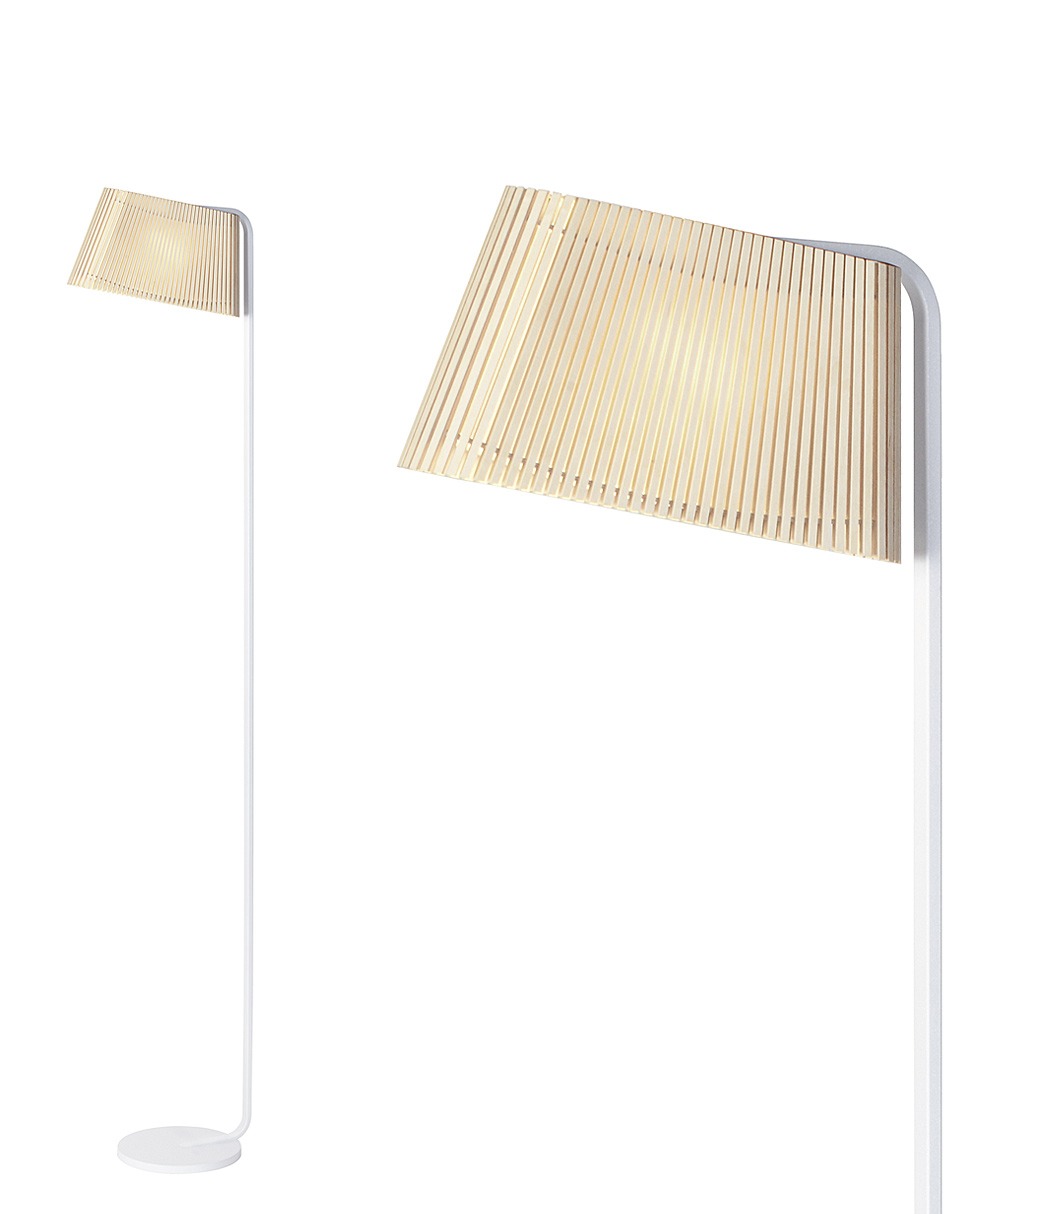 Owalo 7010 floor lamp is available in natural birch